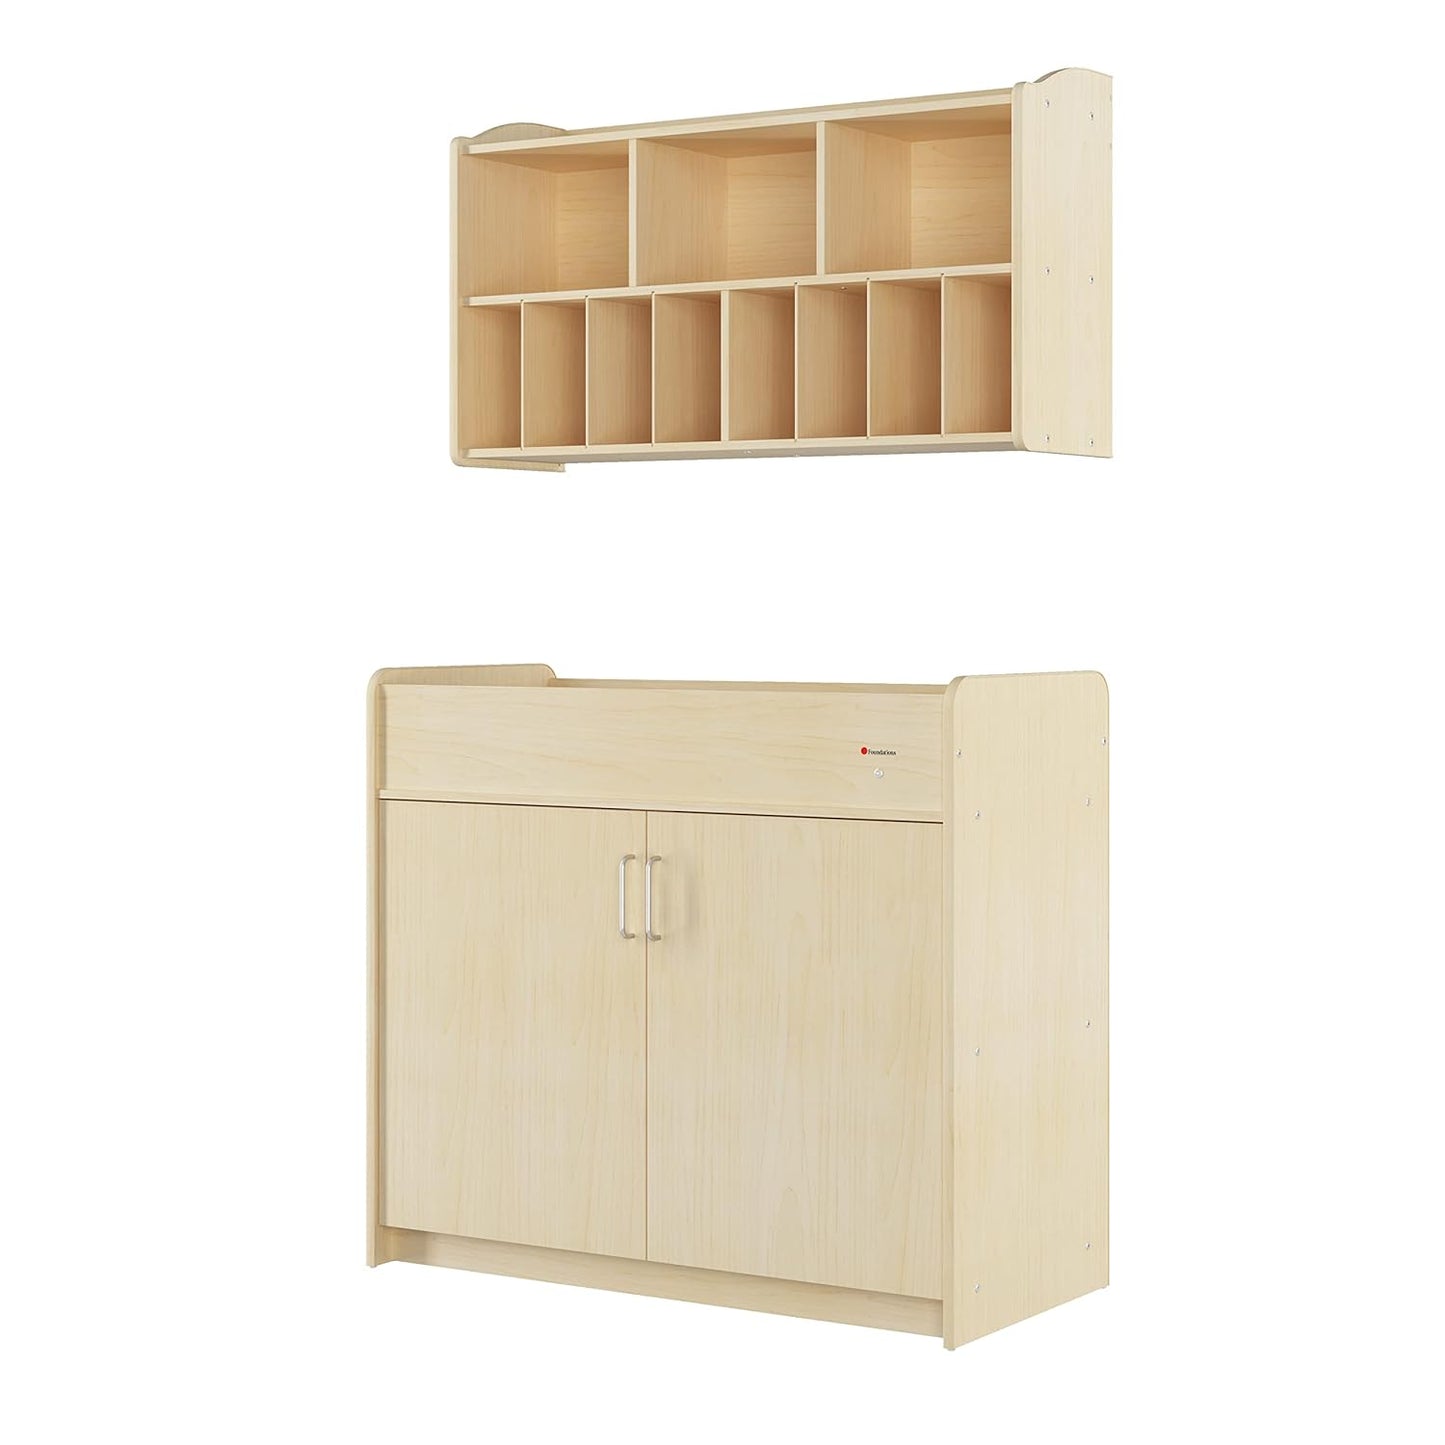 Safetycraft Daycare Changing Table - Durable Wood Cabinet with 2 Built-In Shelves - Storage W/Soft Close Hinges, Includes 1" Durable Mattress Pad - Natural